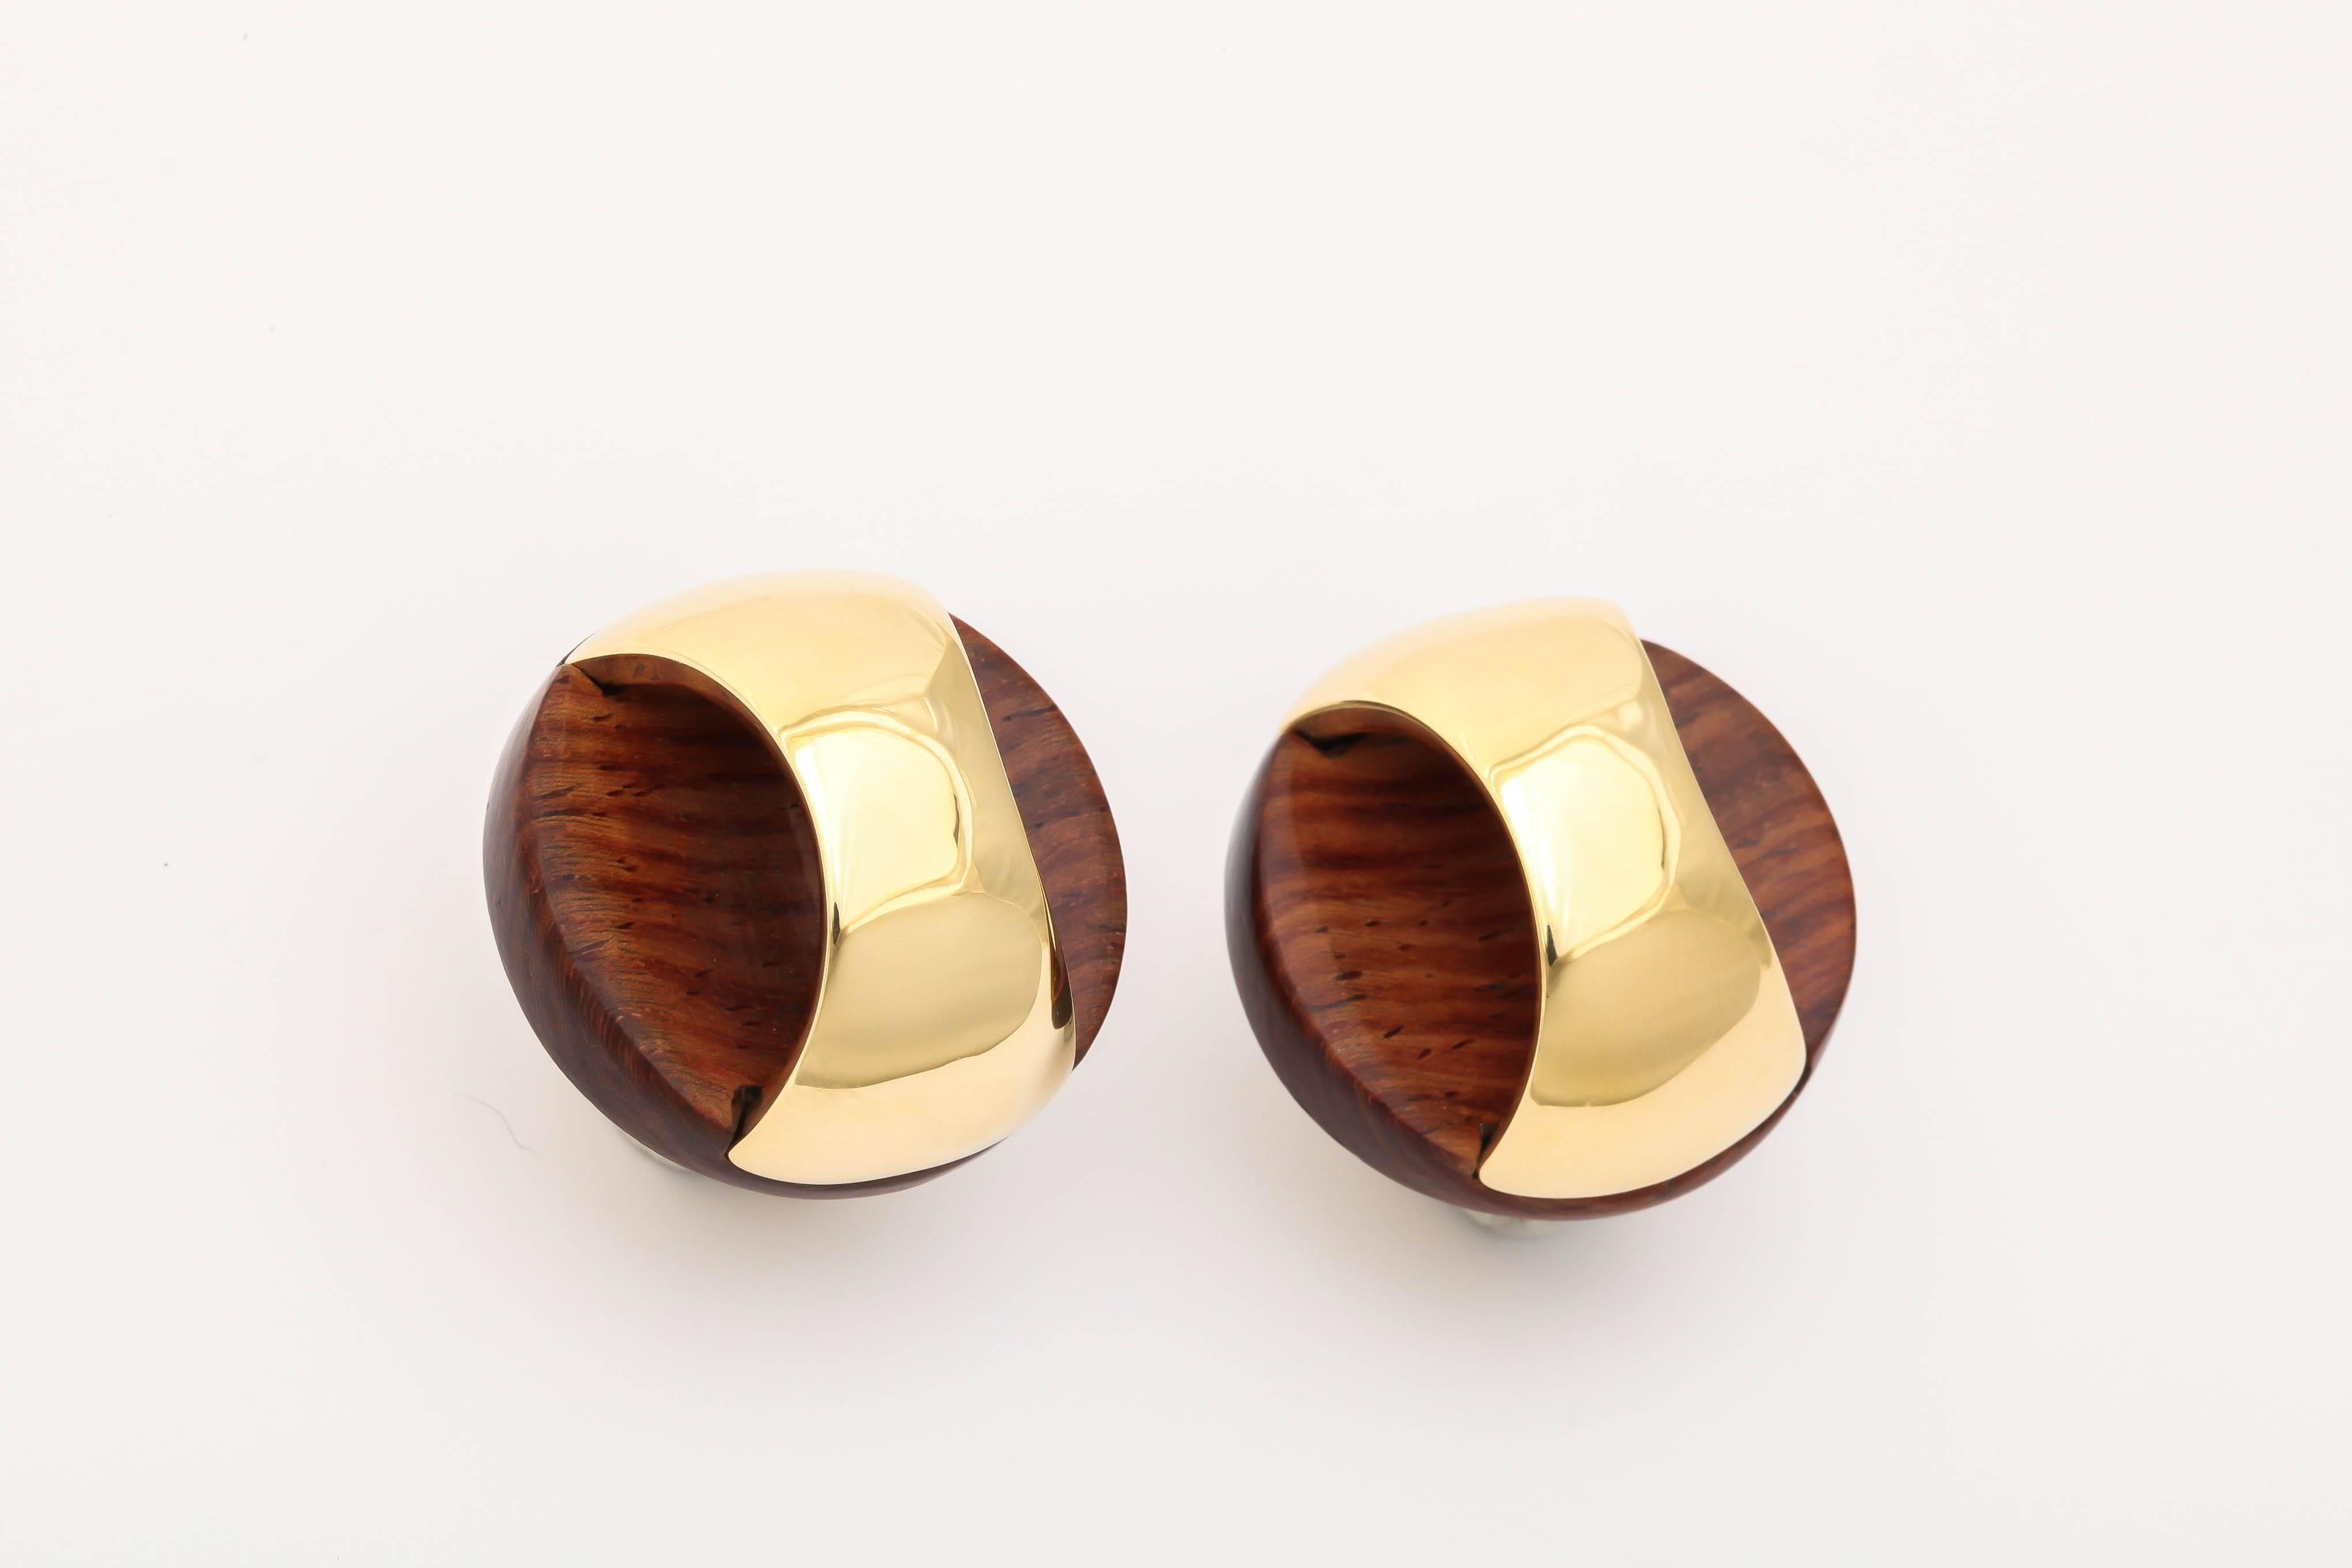 Circular concave wooden disc with 18k yellow gold bright polished embellishment.
Post clip closure

